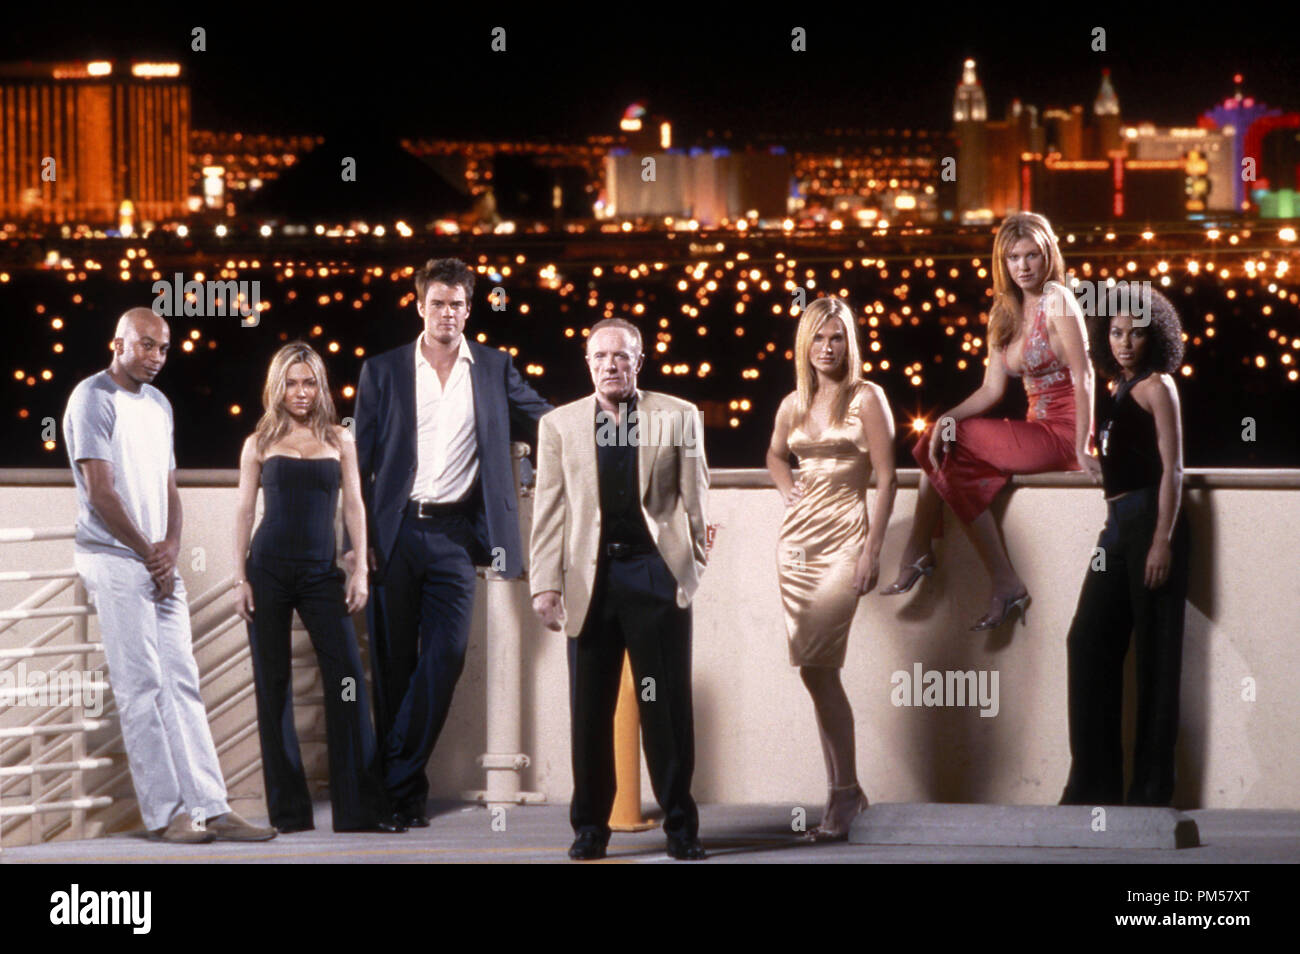 Film Still from 'Las Vegas' James Lesure, Molly Sims, Josh Duhamel, James Caan, Vanessa Marcil, Nikki Cox, Marsha Thomason circa 2004  File Reference # 30735452THA  For Editorial Use Only -  All Rights Reserved Stock Photo